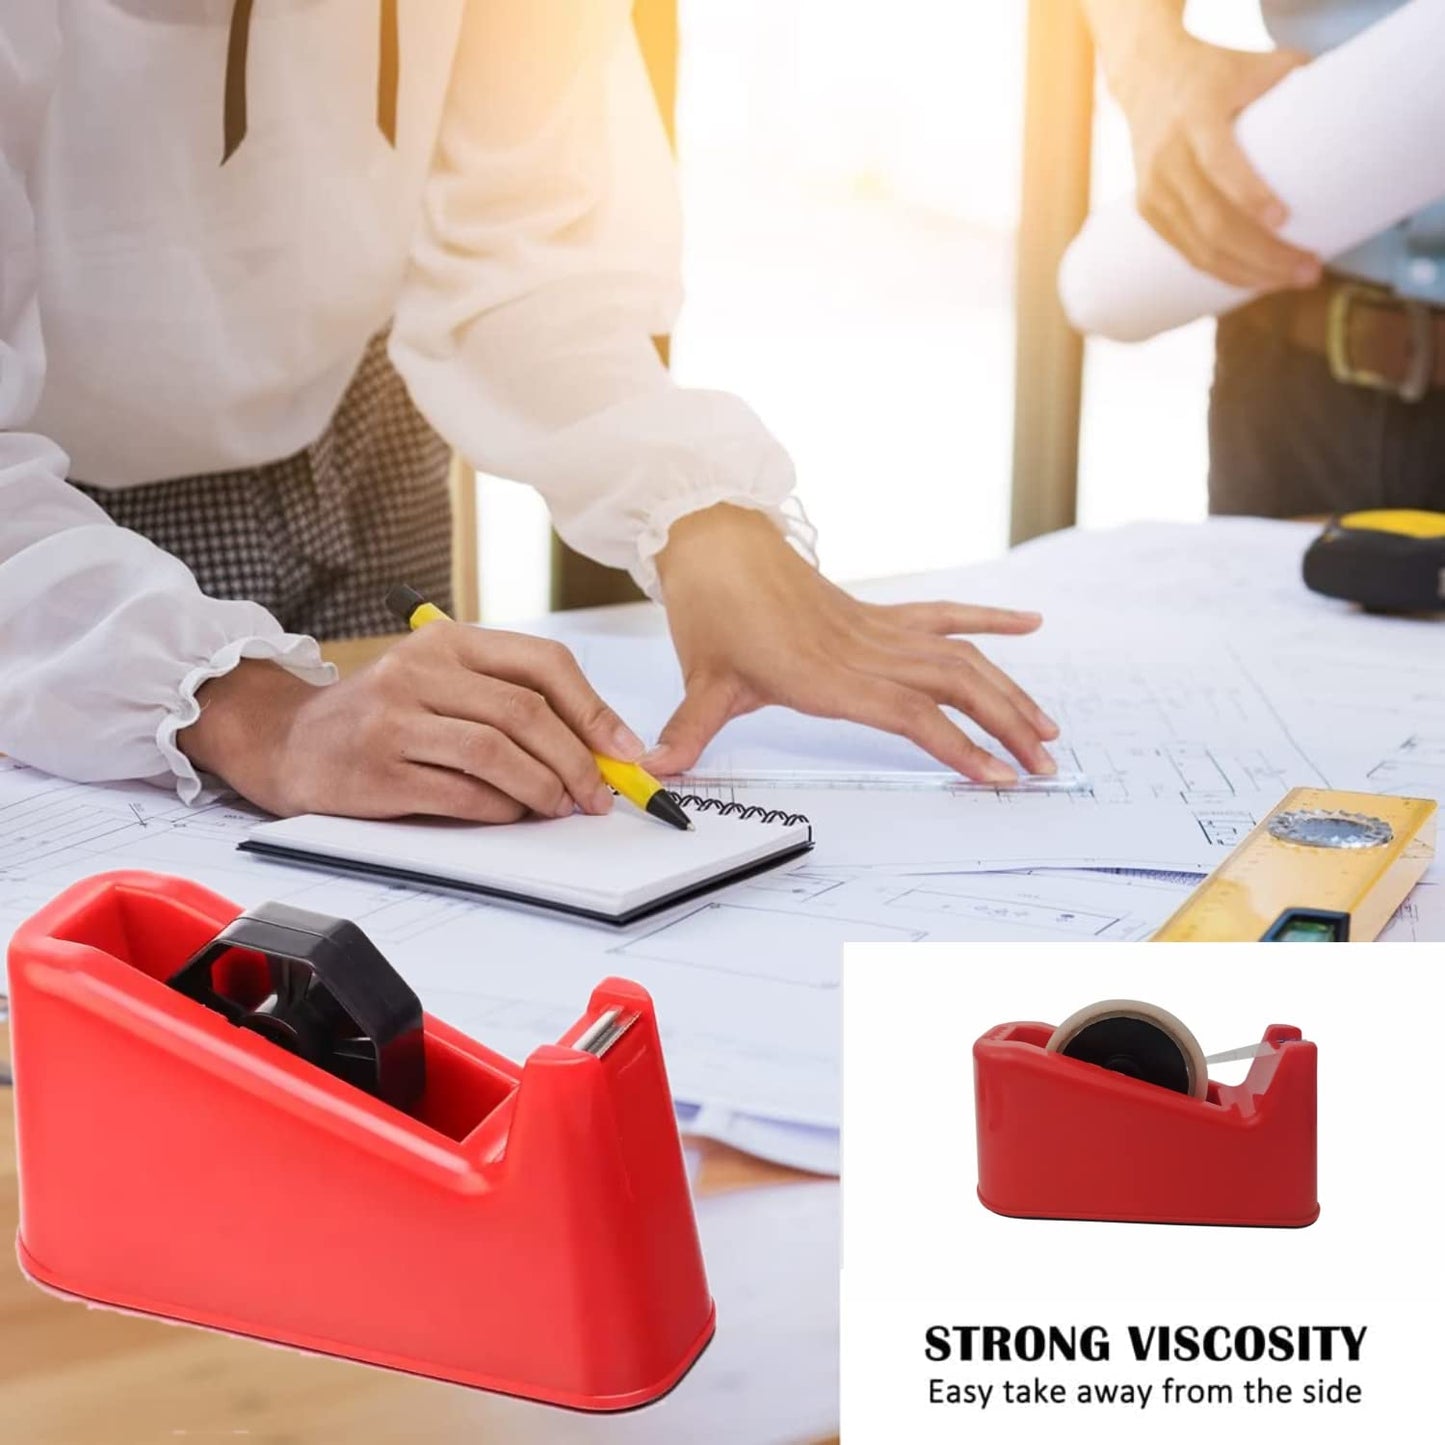 Oddy Anti-Skid Tape Dispenser/Hand Operated with Stainless Steel Cutter, Red Color with Free 12mm Tape Inside The Box/Suitable for 12, 18 & 24mm Width of Tapes